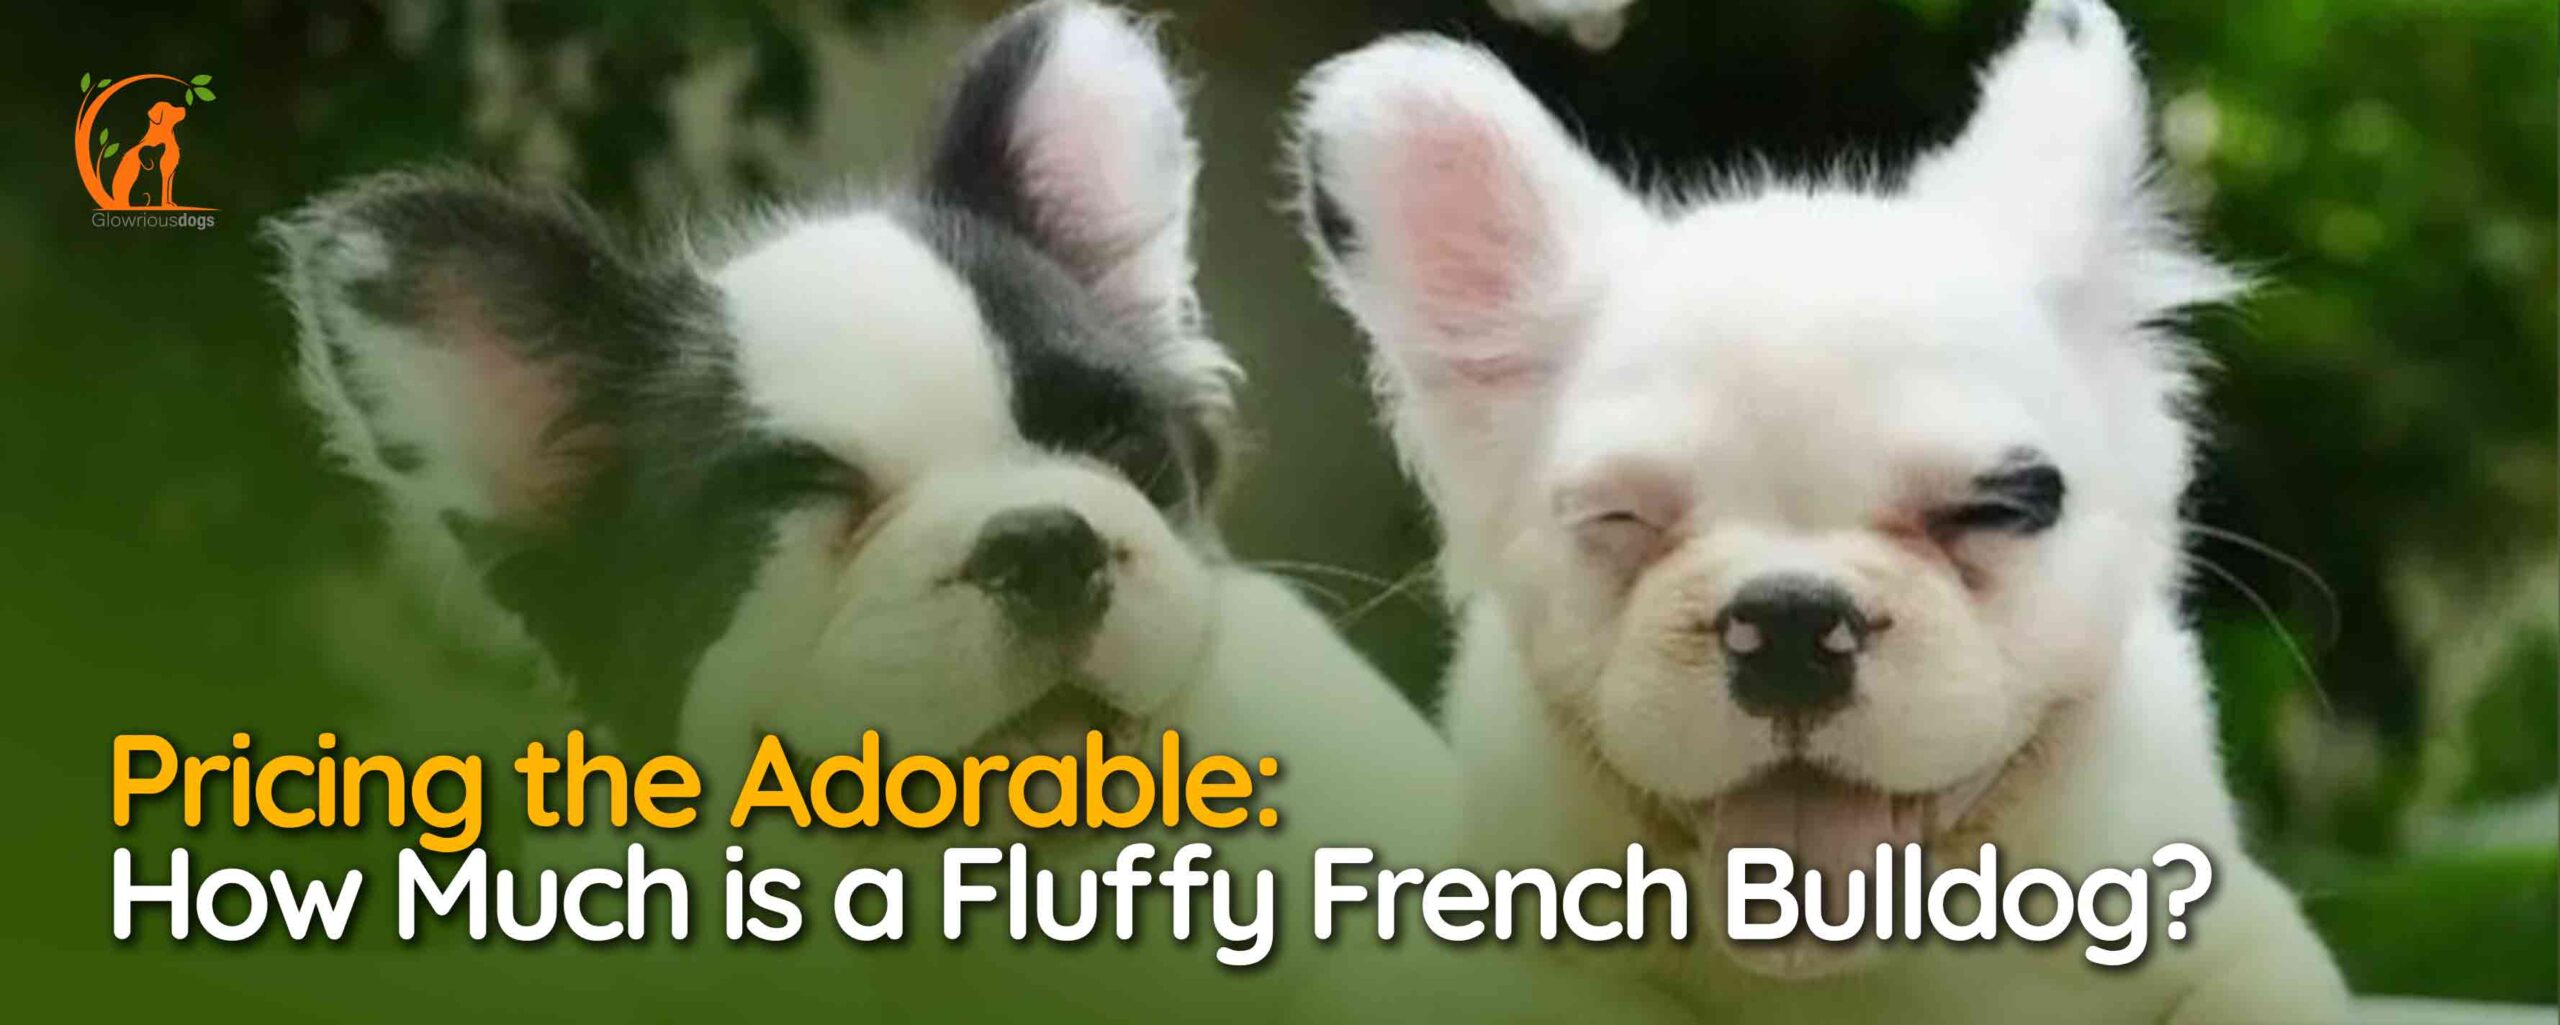 How Much is a Fluffy French Bulldog